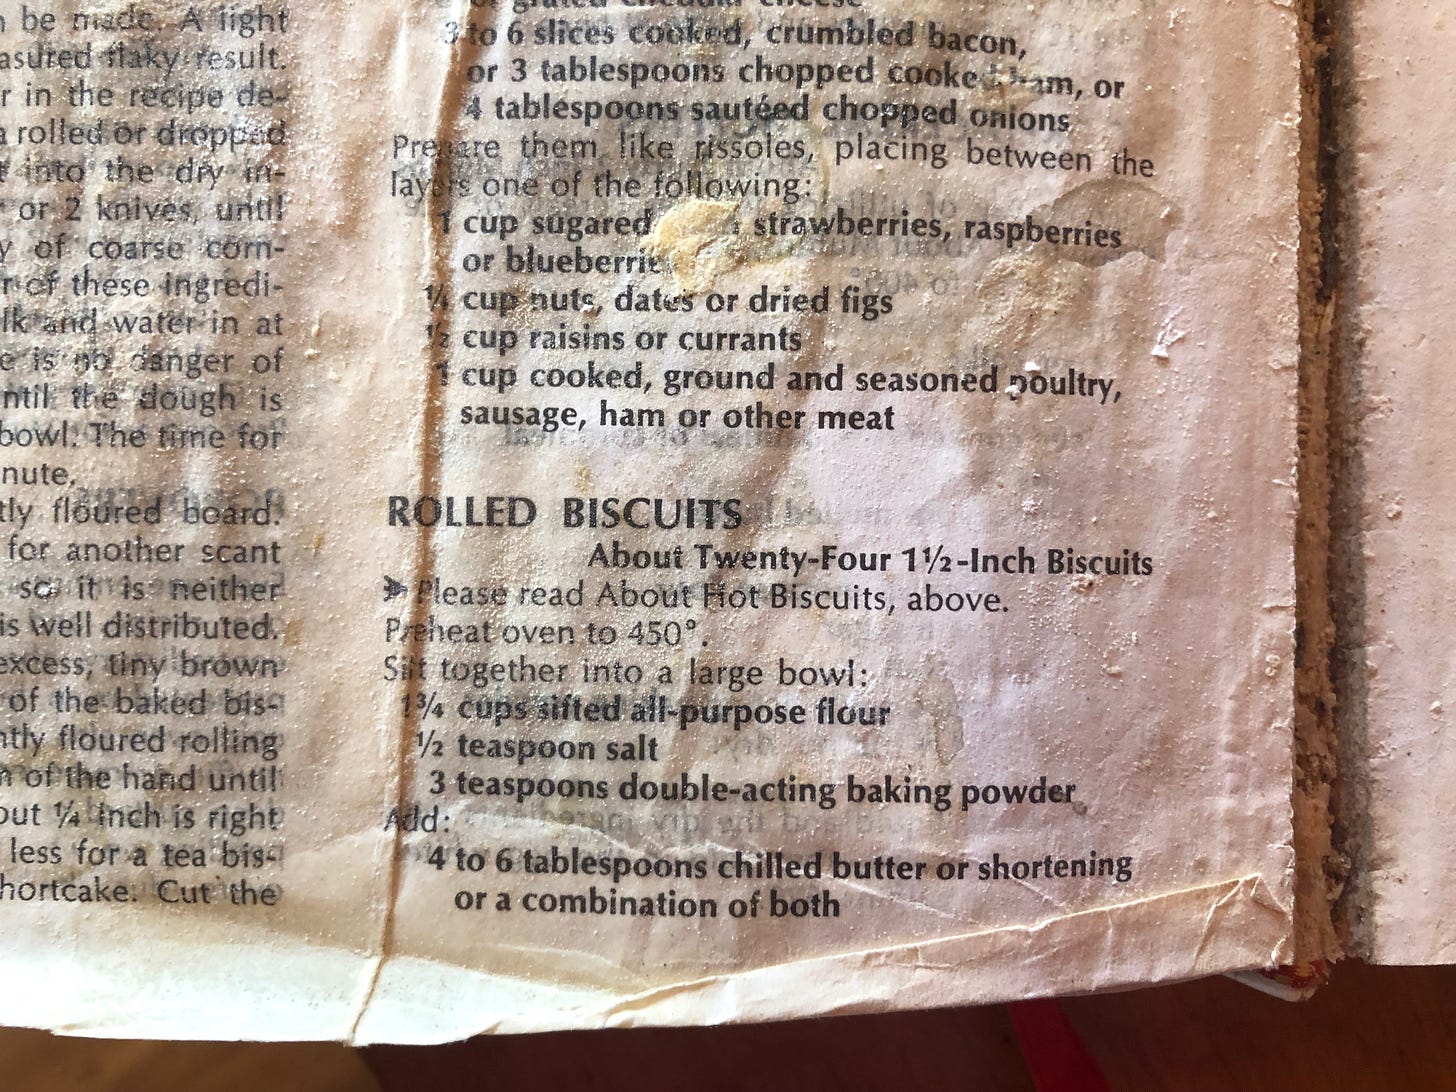 Photo of a page from The Joy of Cooking, showing the recipe for Rolled Biscuits. The page is covered with stains, bits of crusty flour, wrinkles, and tears.